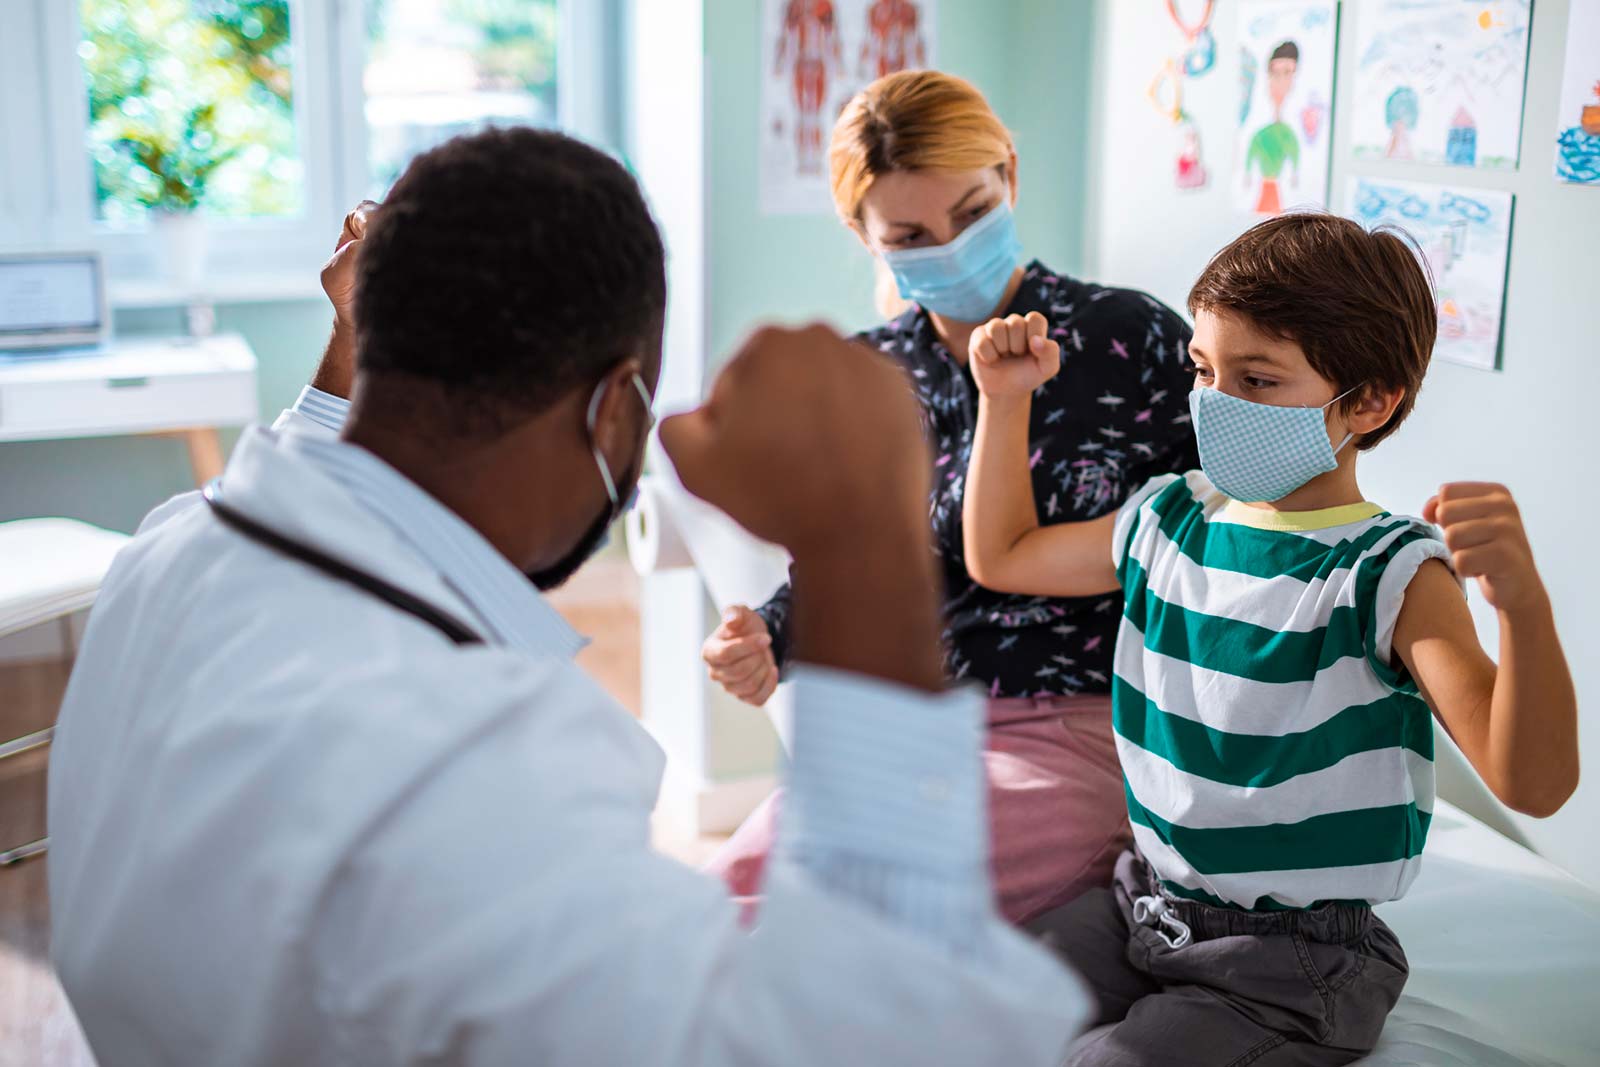 Doctor and patient wearing masks during in-person appointment